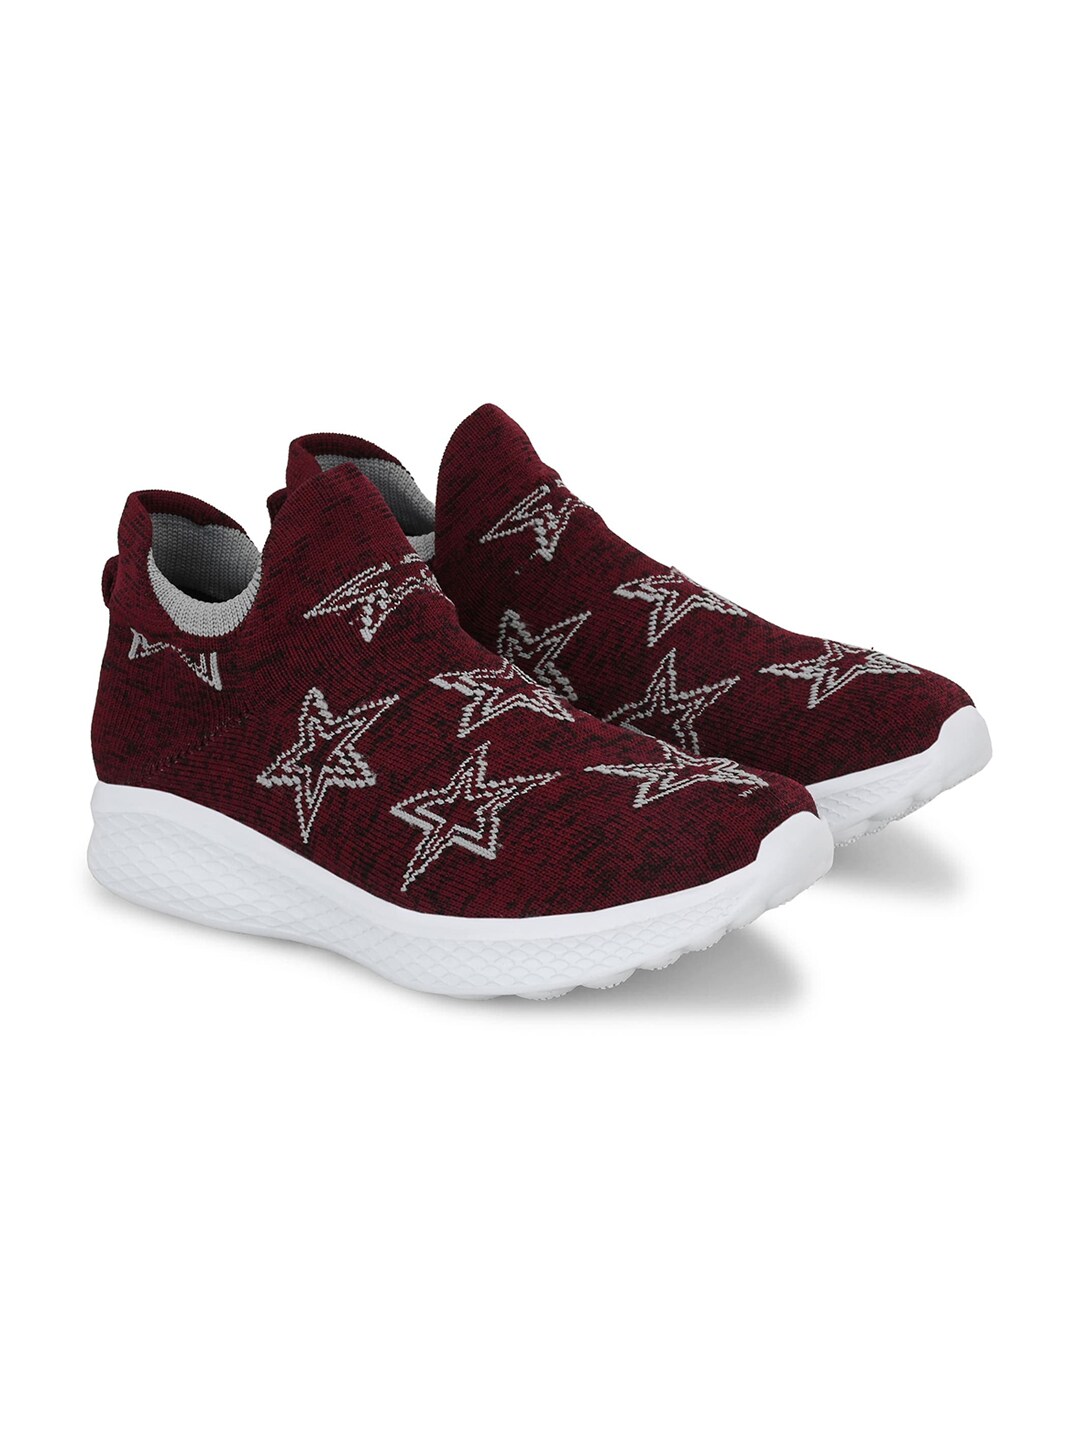 Mast & Harbour Women Red Woven Design Sneakers Price in India